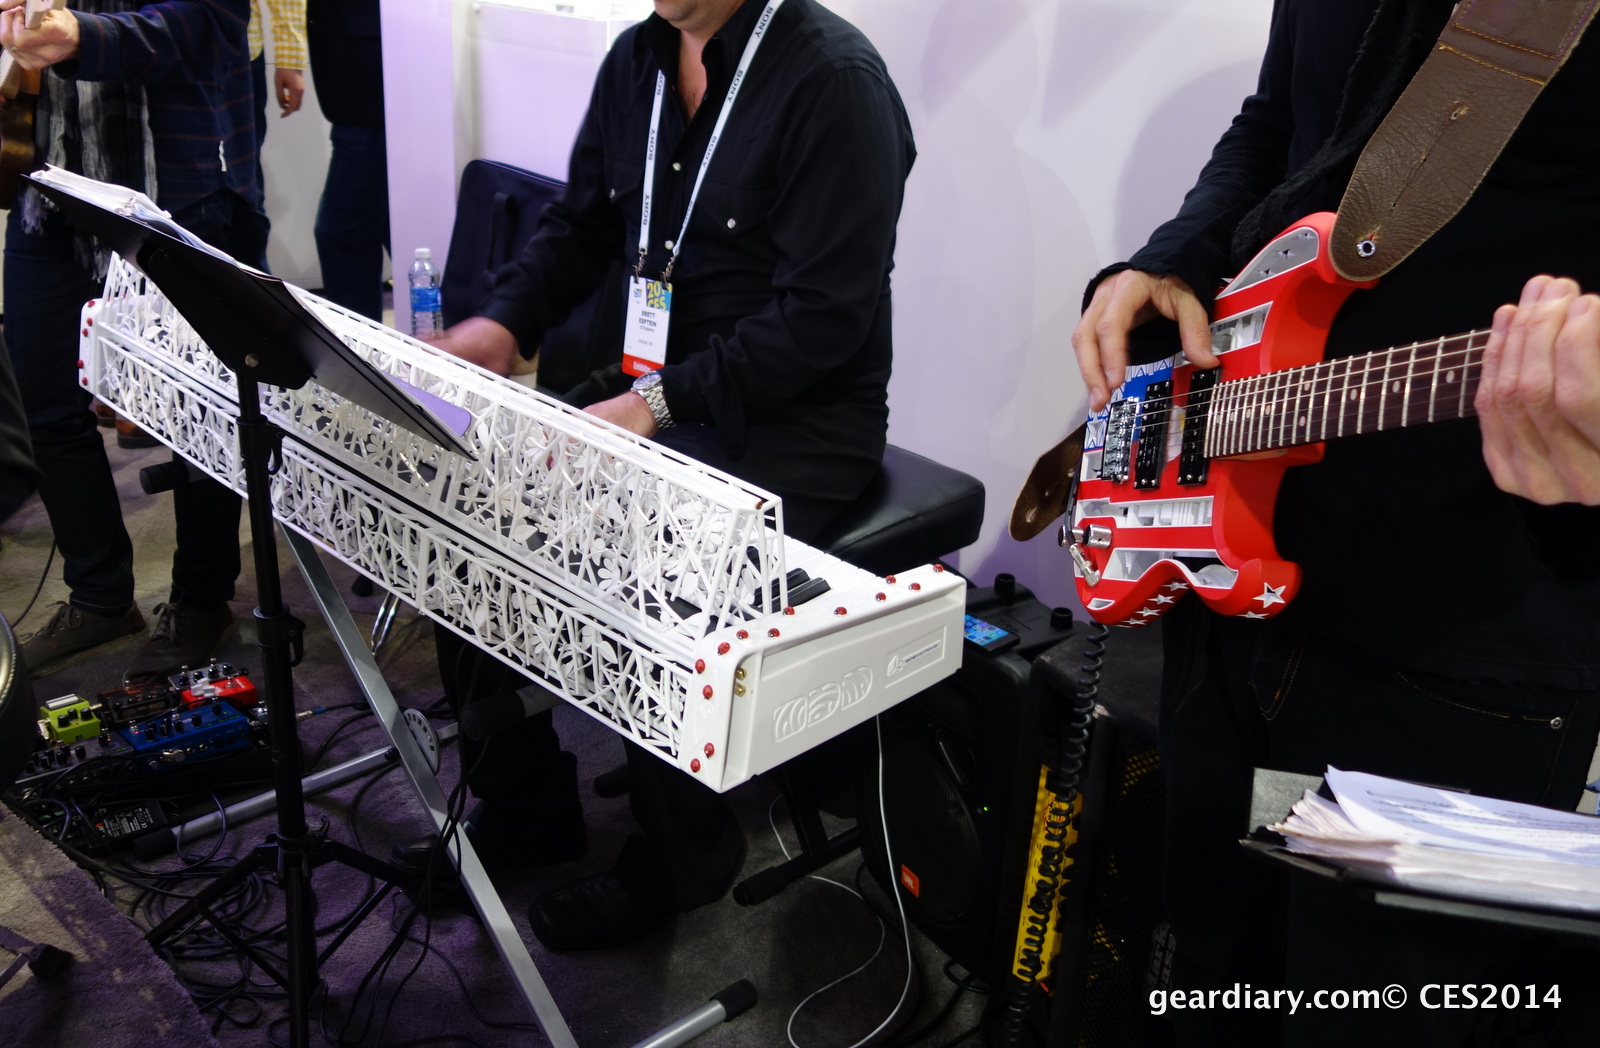 3D-Printed Instruments Hit Some Sharp Notes